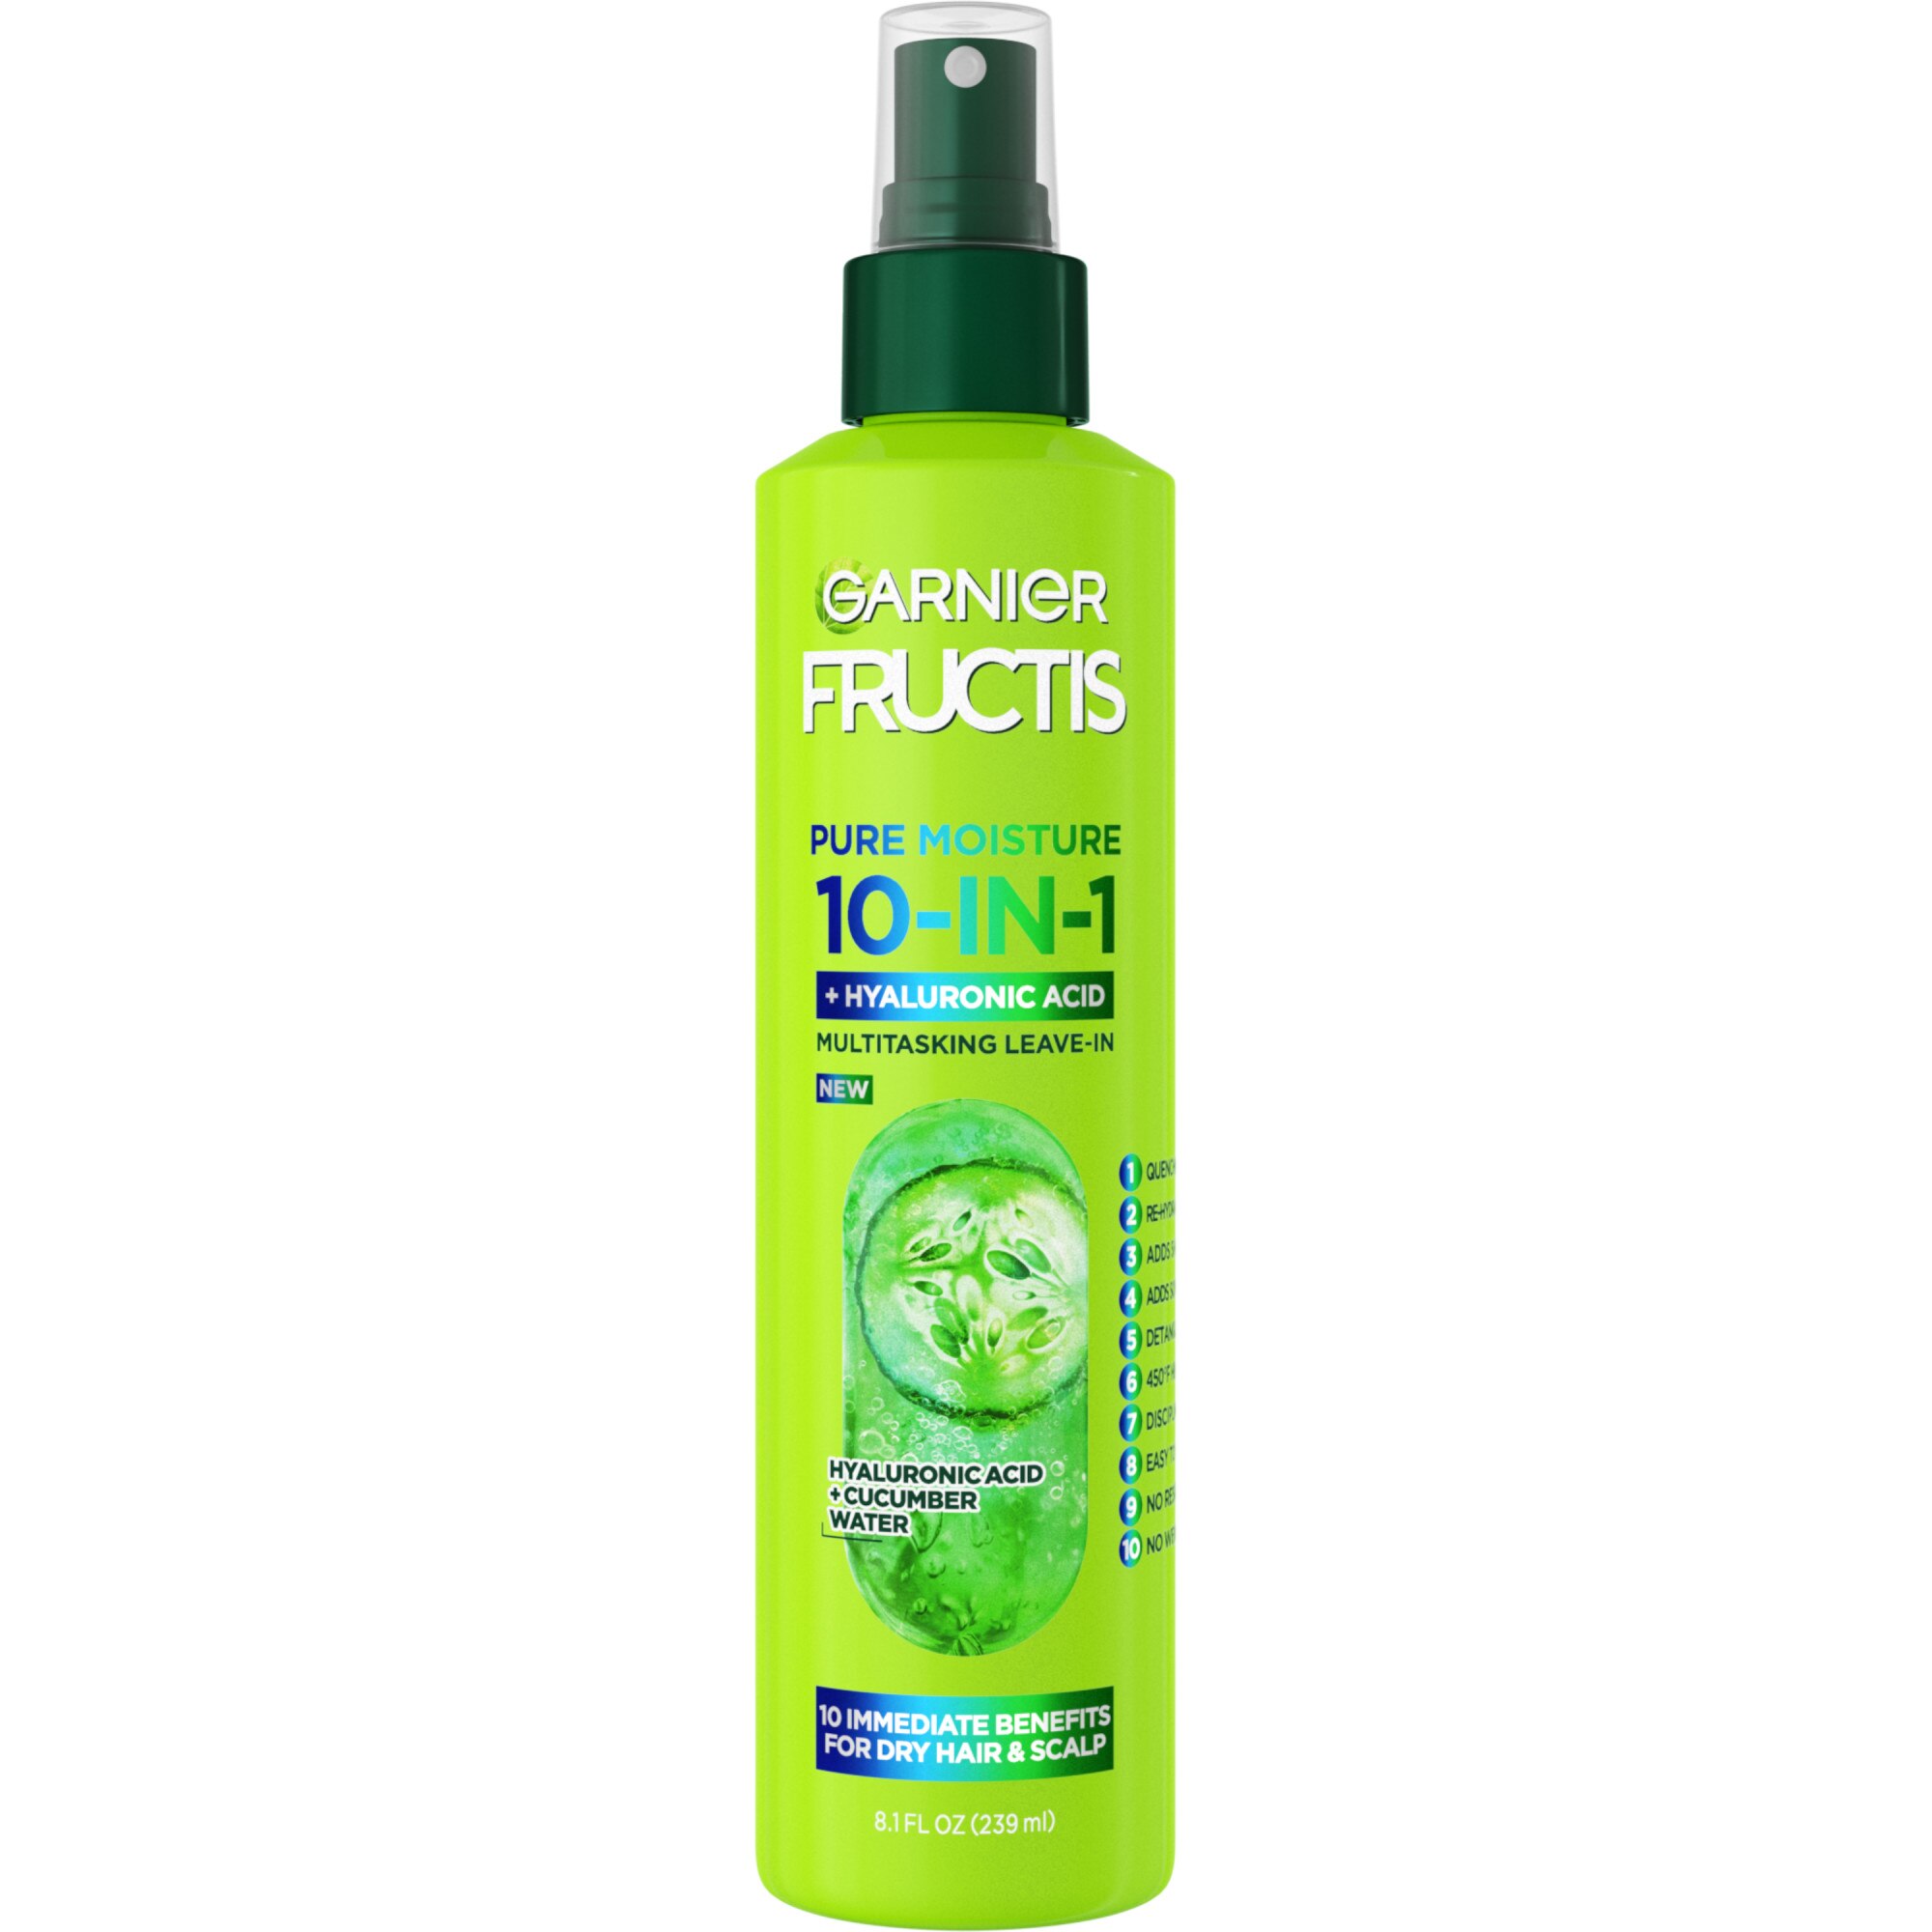 Garnier Fructis Pure Moisture 10 in 1 Spray, for Dry Hair and Scalp,  OZ  | Pick Up In Store TODAY at CVS